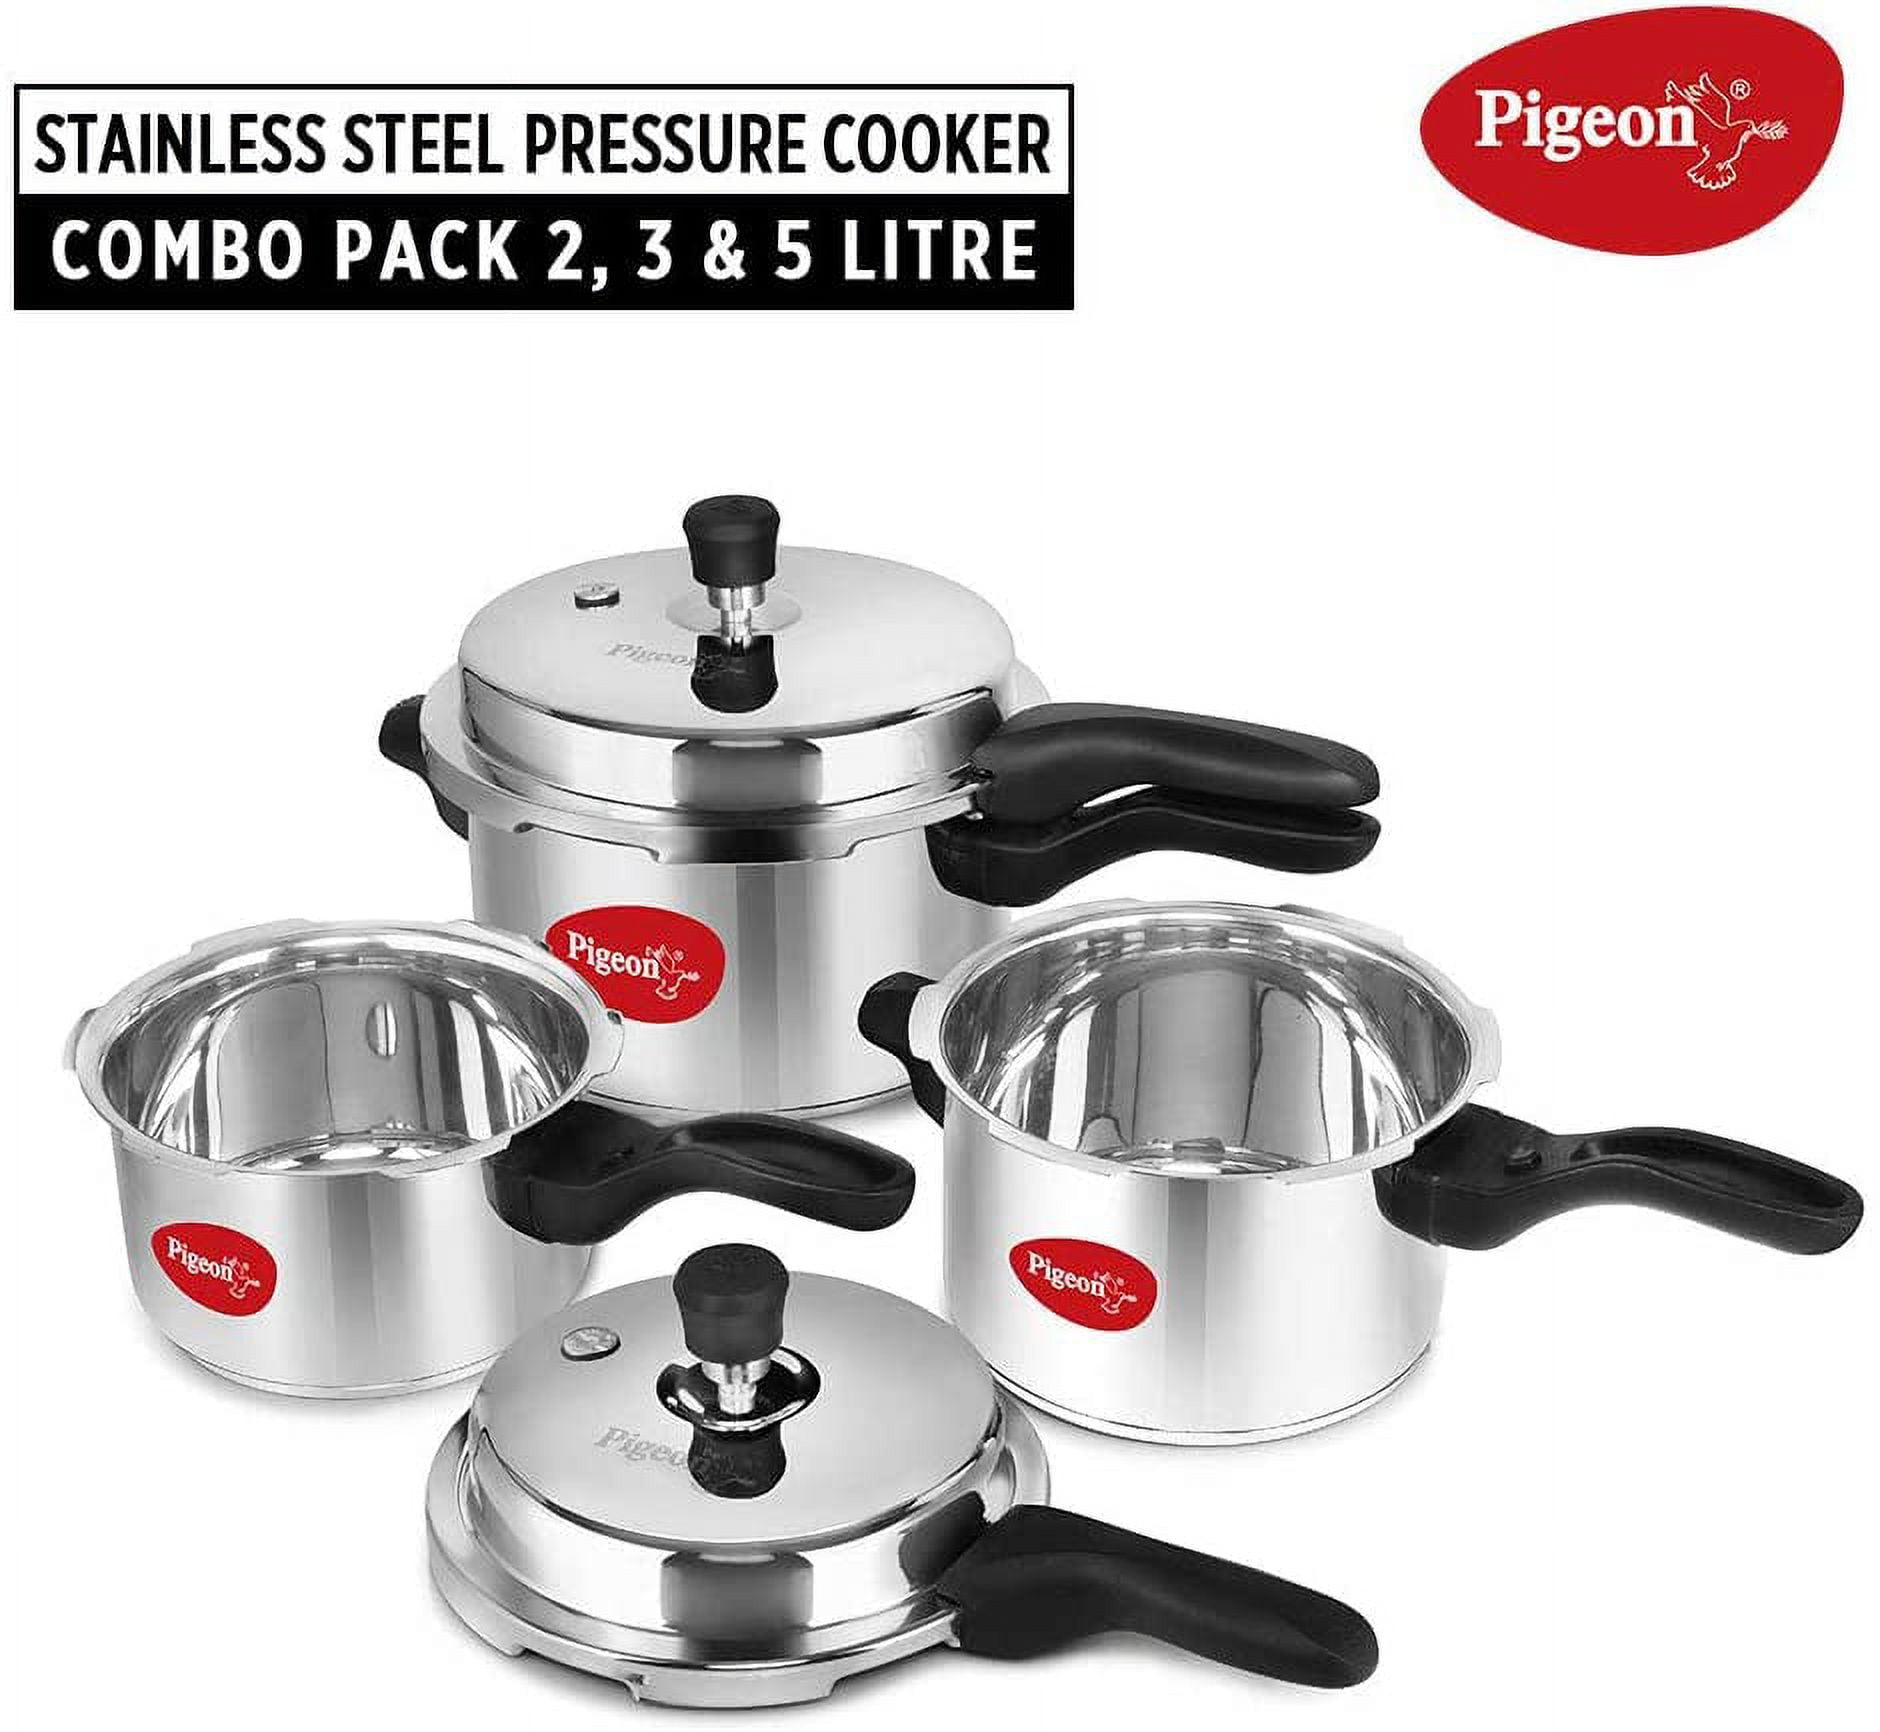  Pigeon Pressure Cooker Set 2 + 3 + 5 Quart - Stainless Steel -  Induction Base Outer Lid - Cook delicious food in less time: soups, rice,  legumes, and more - 3 Piece Set Silver: Home & Kitchen